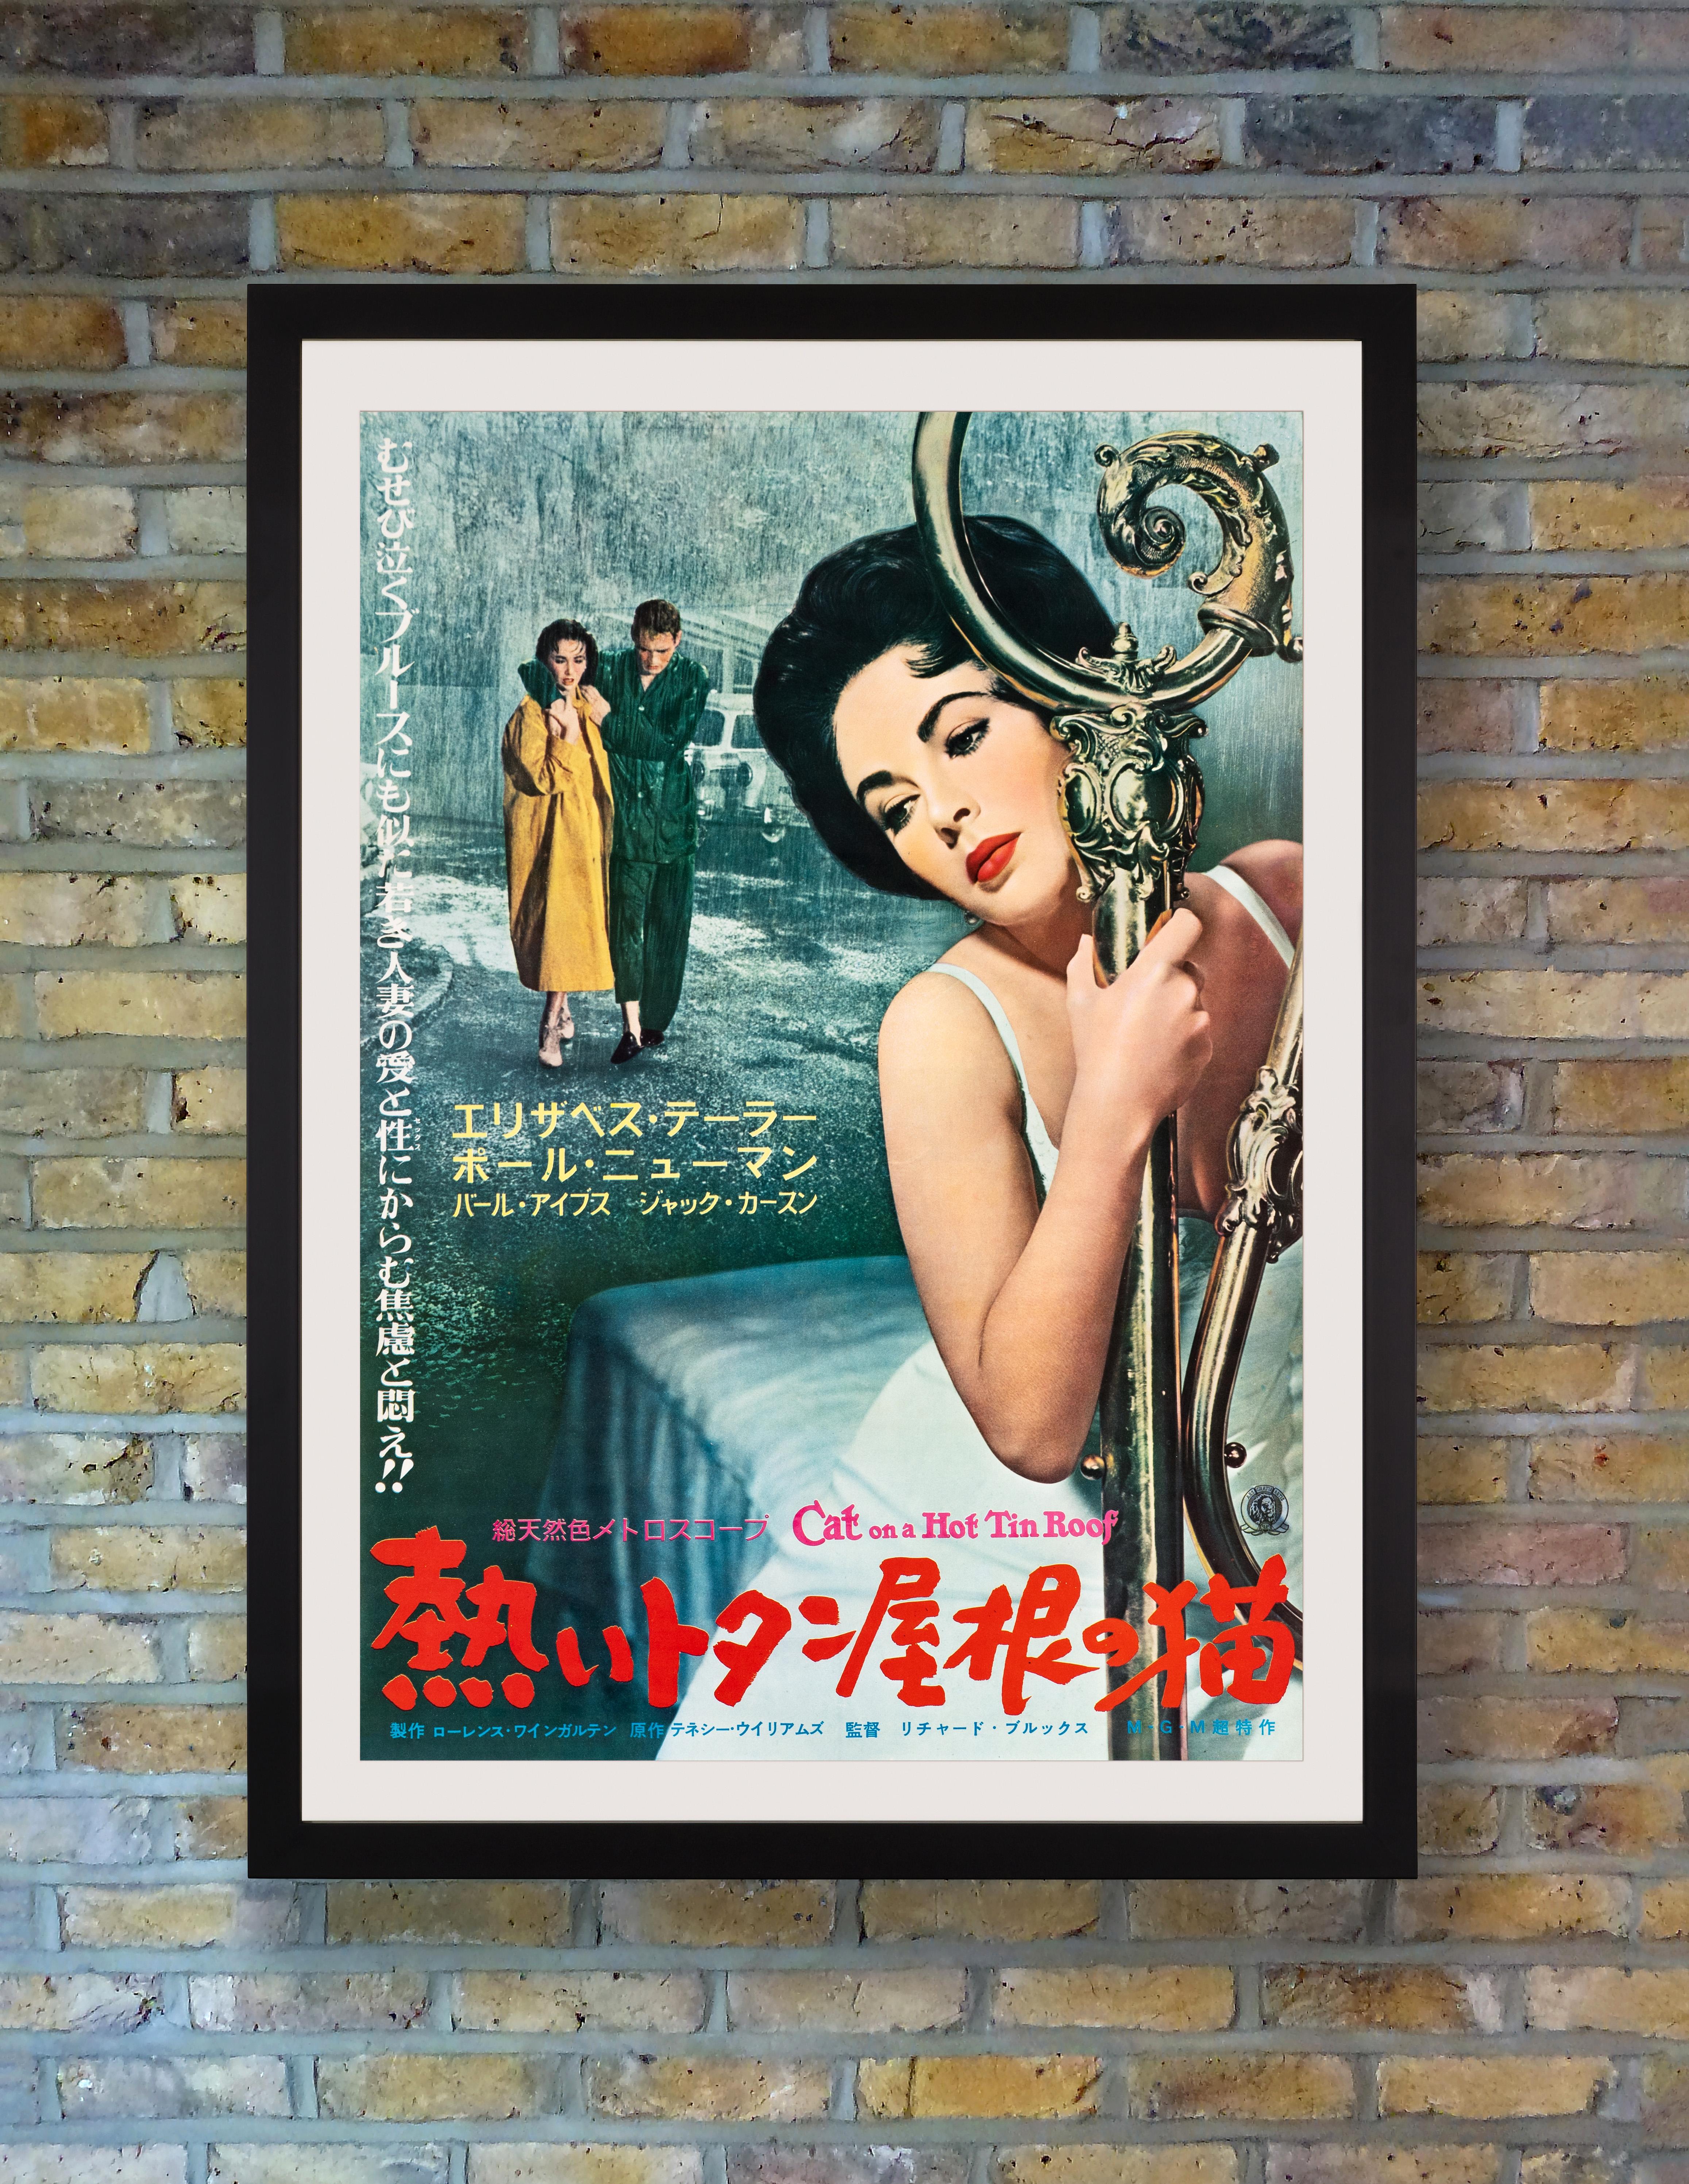 A sultry Elizabeth Taylor smoulders on this extremely rare and seductive Japanese B2 poster for the original release of MGM's 'Cat on a Hot Tin Roof' in Japan. In a legendary pairing, Paul Newman co-starred as apathetic husband Brick opposite Taylor